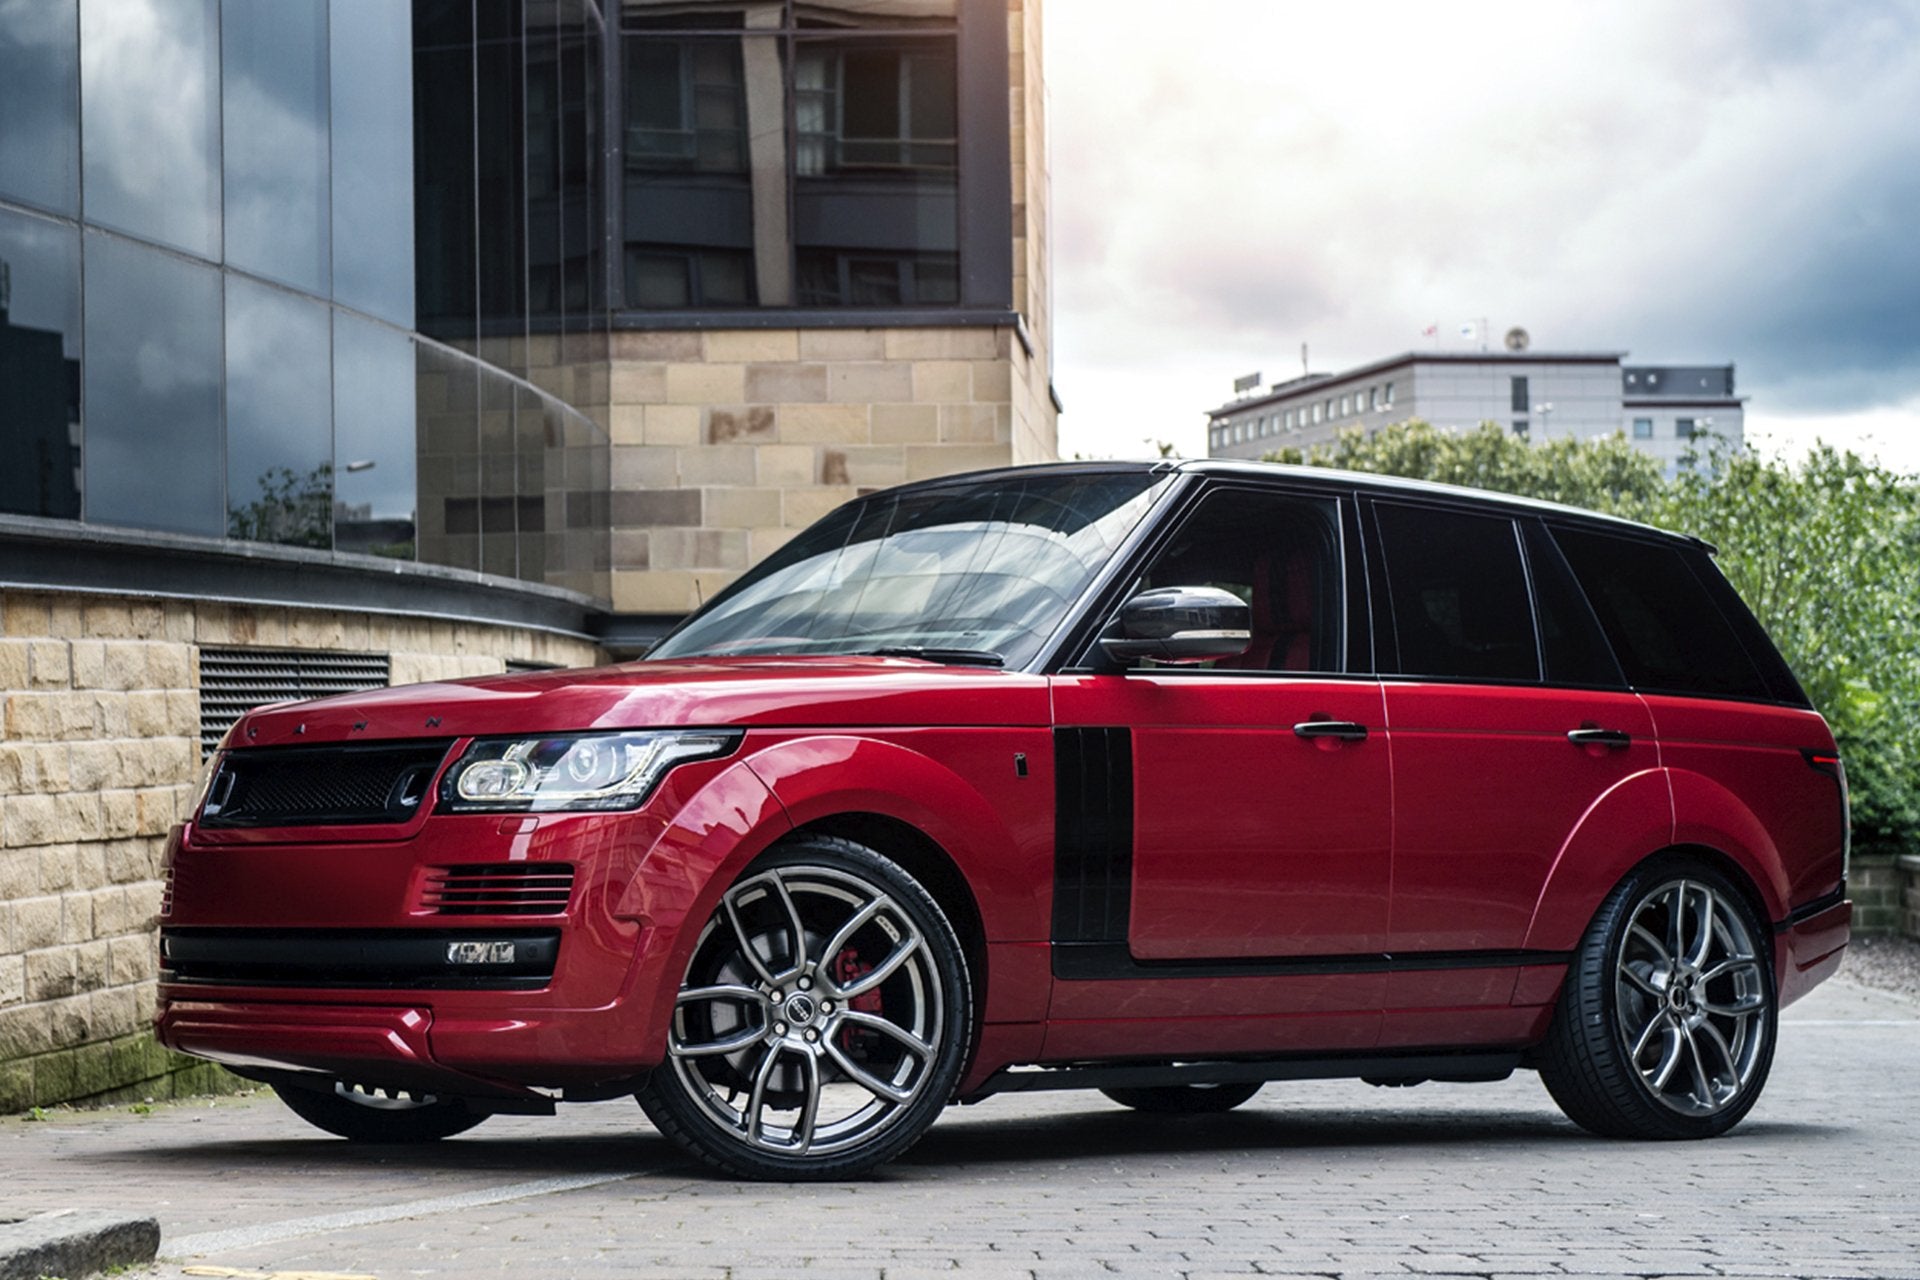 Range Rover (2013-2018) Rs600 Exterior Body Styling Pack by Kahn - Image 2032